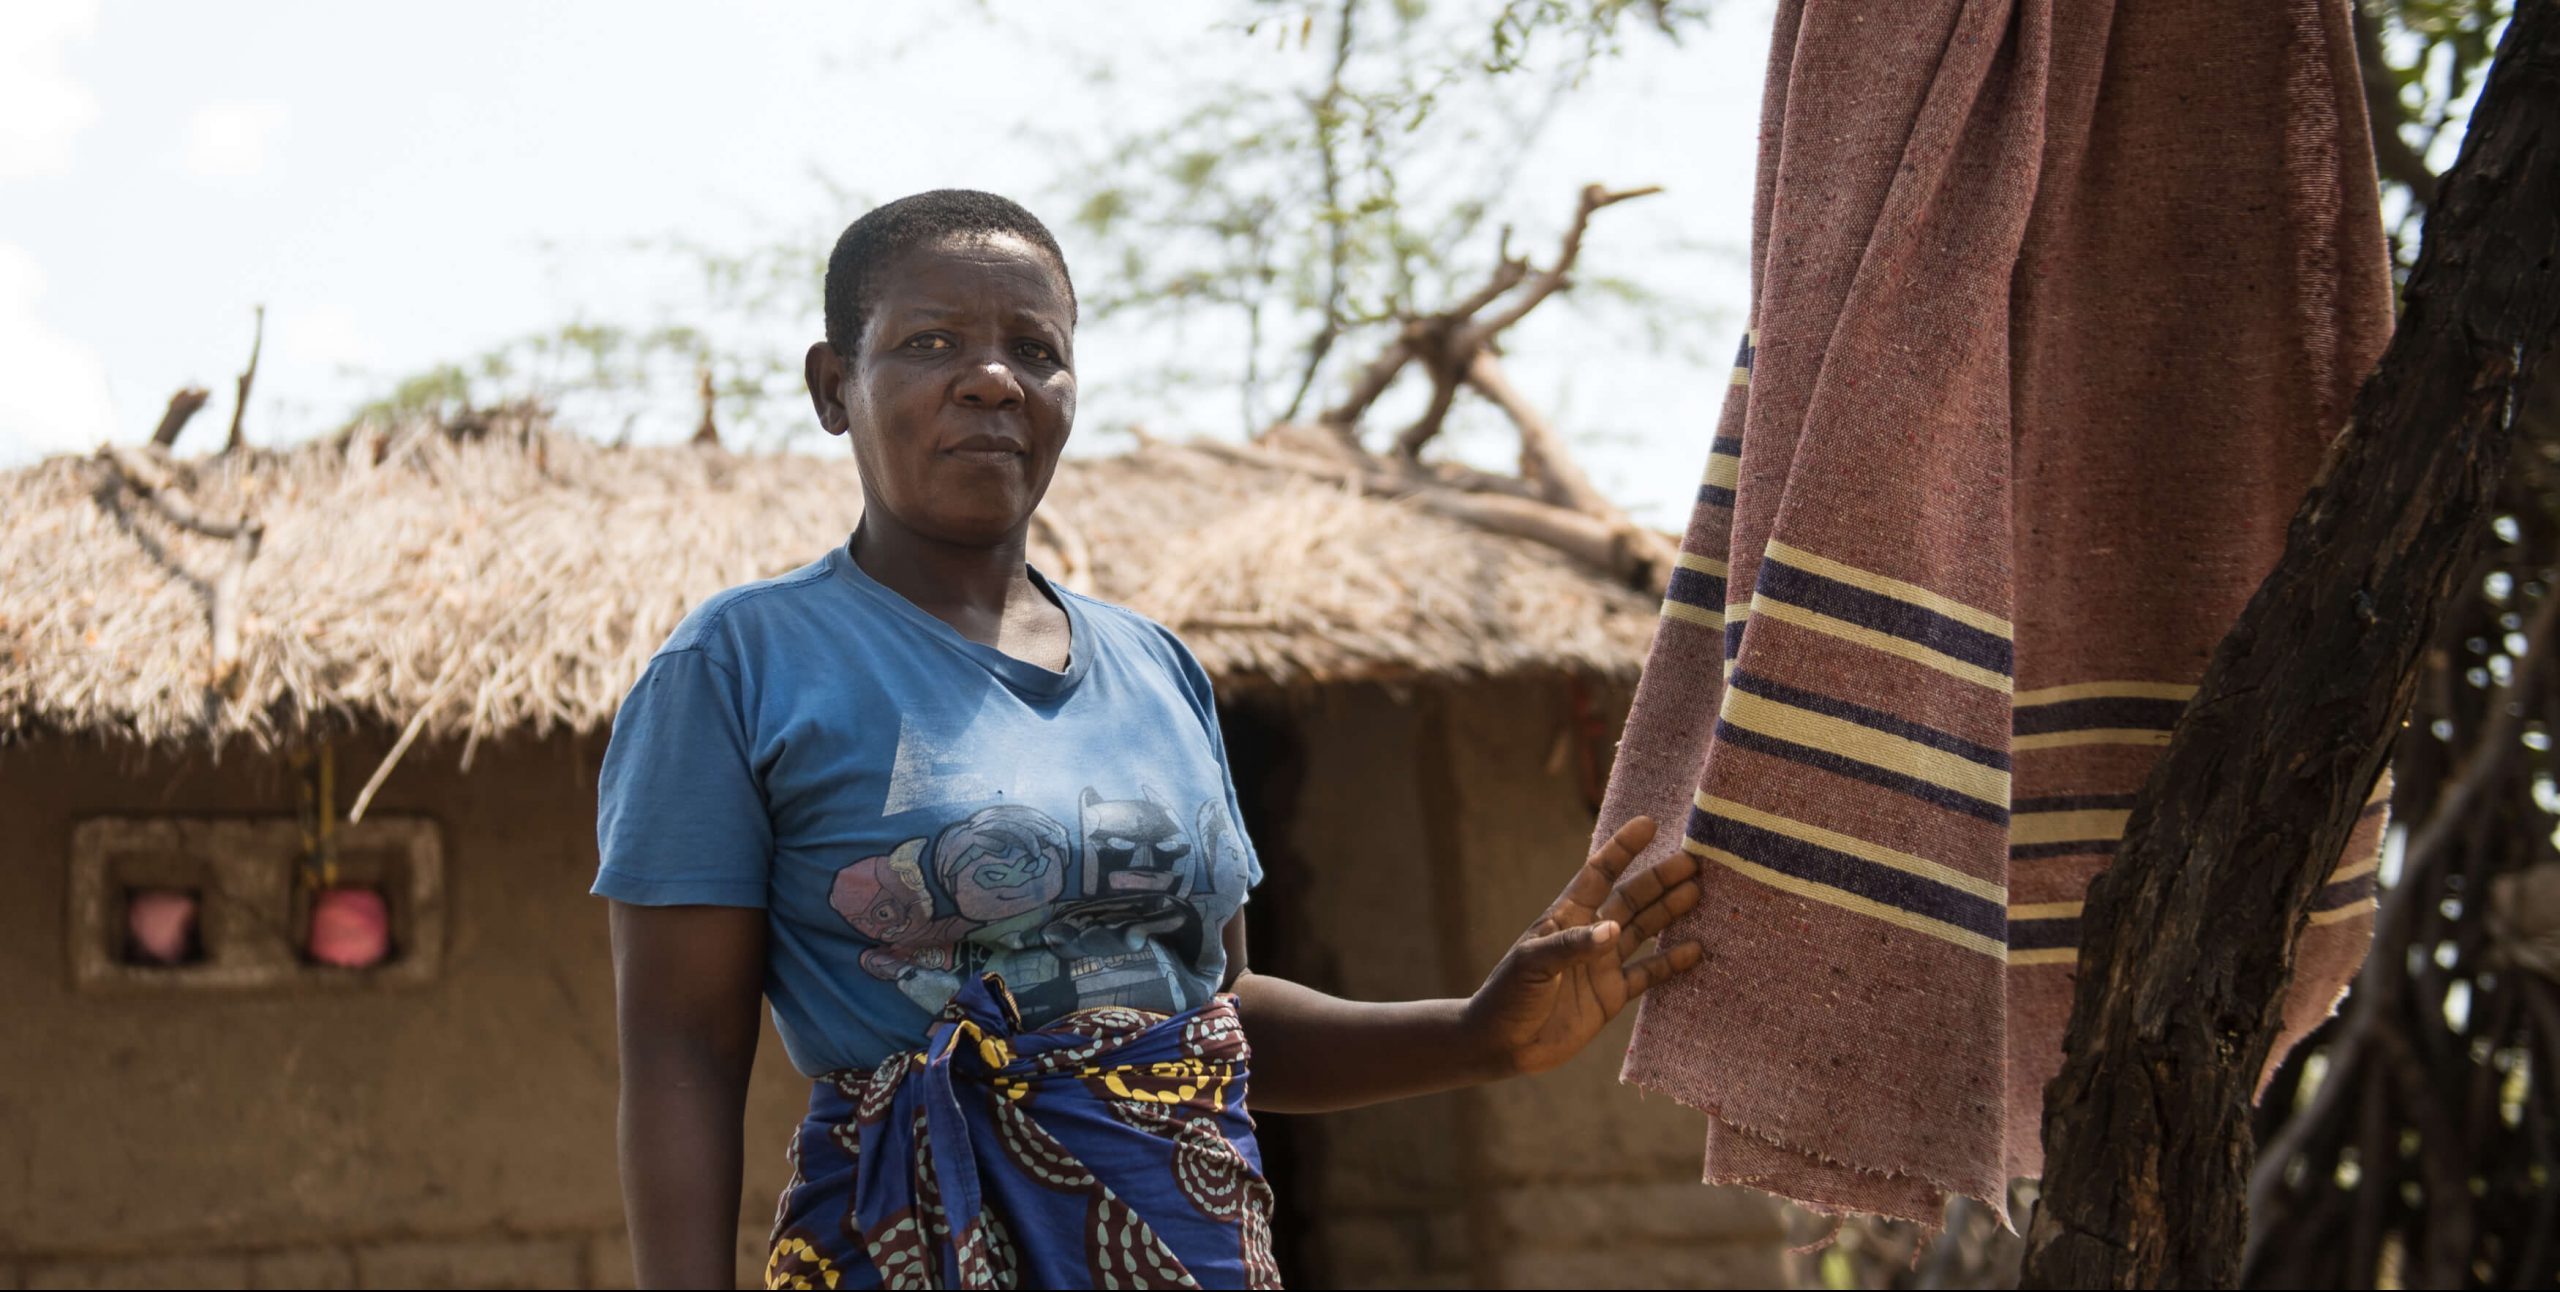 Joyce was displaced by Tropical Storm Ana and now lives in a well-wisher’s house is seen at their village in Chikwawa. Photo: Thoko Chikondi/Oxfam